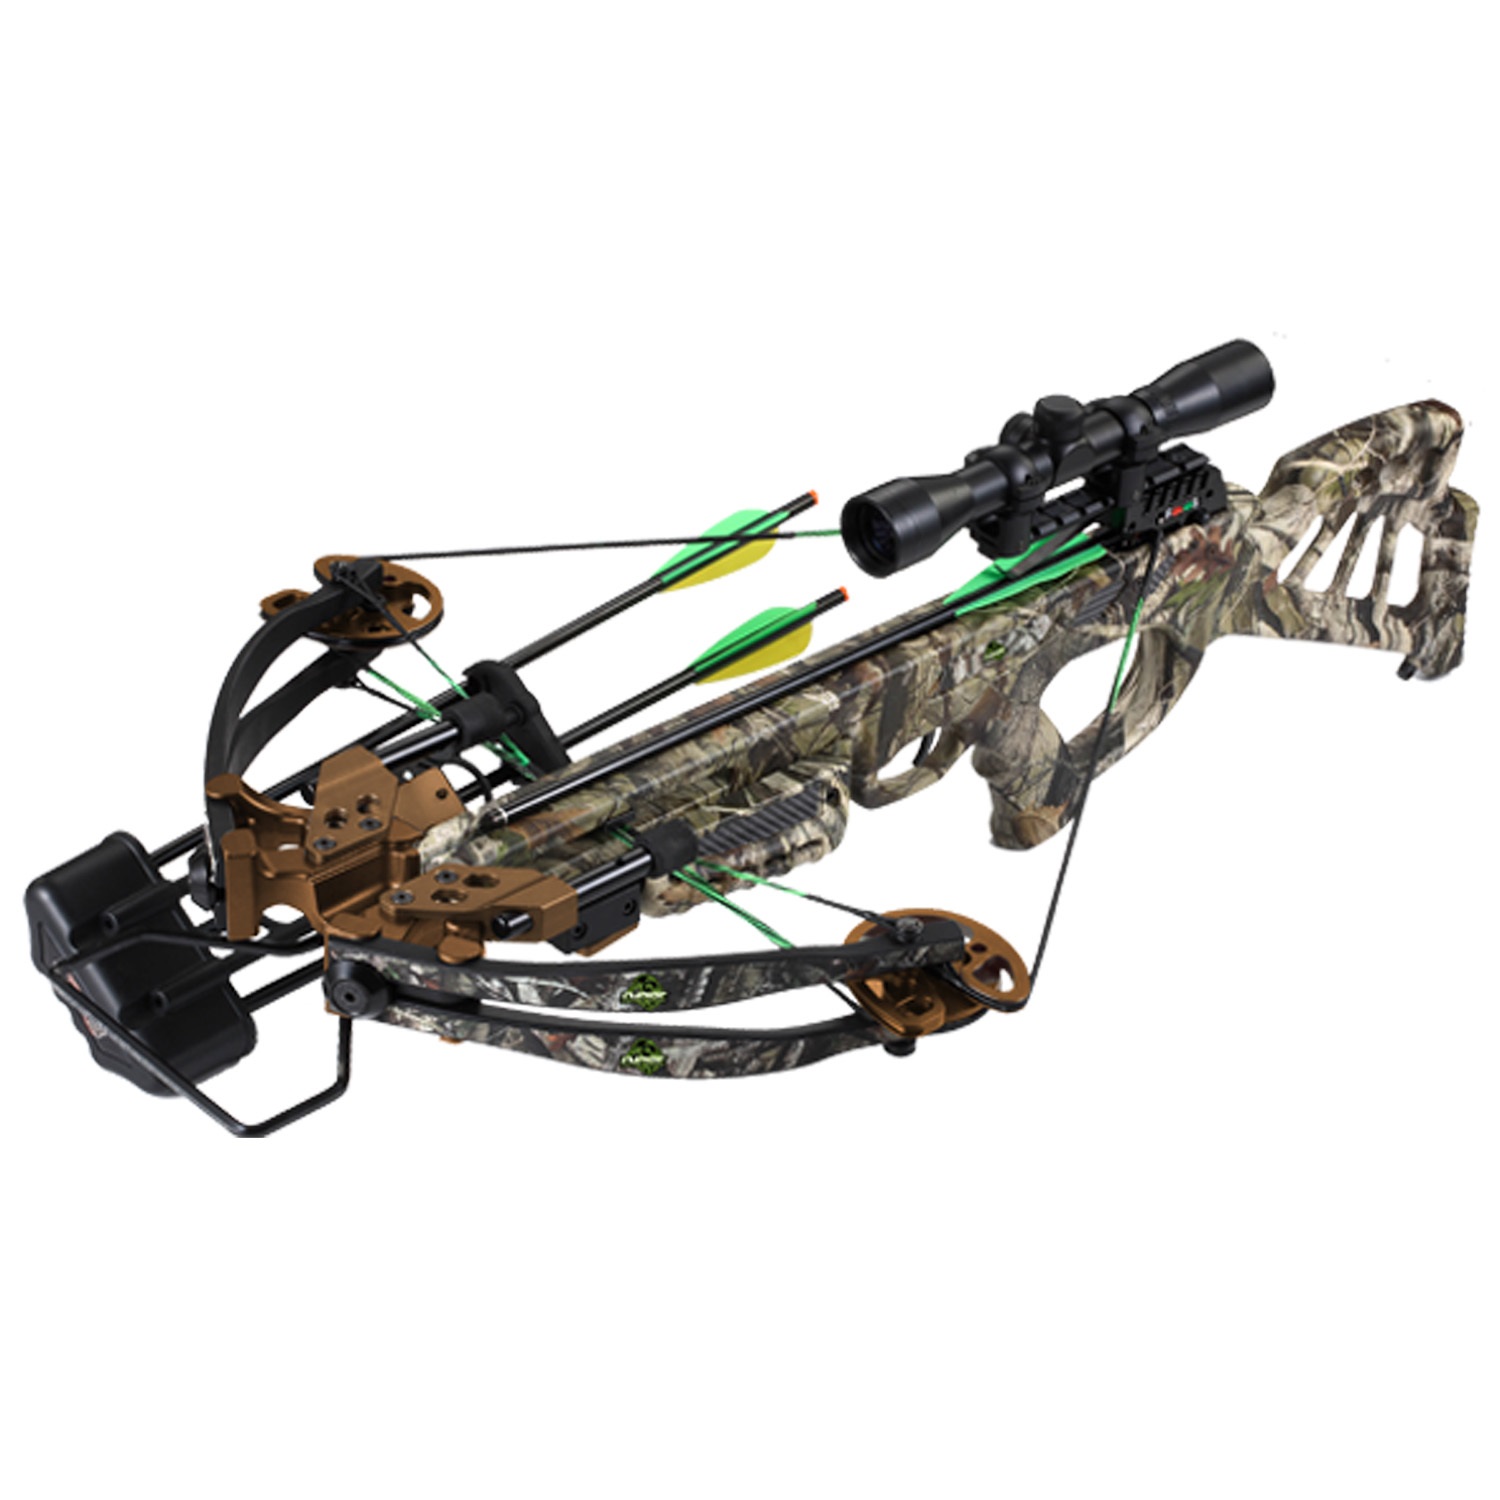 Sa Sports 2017 Empire Beowulf Crossbow Package Camo 20175 Lbs - image 2 of 2